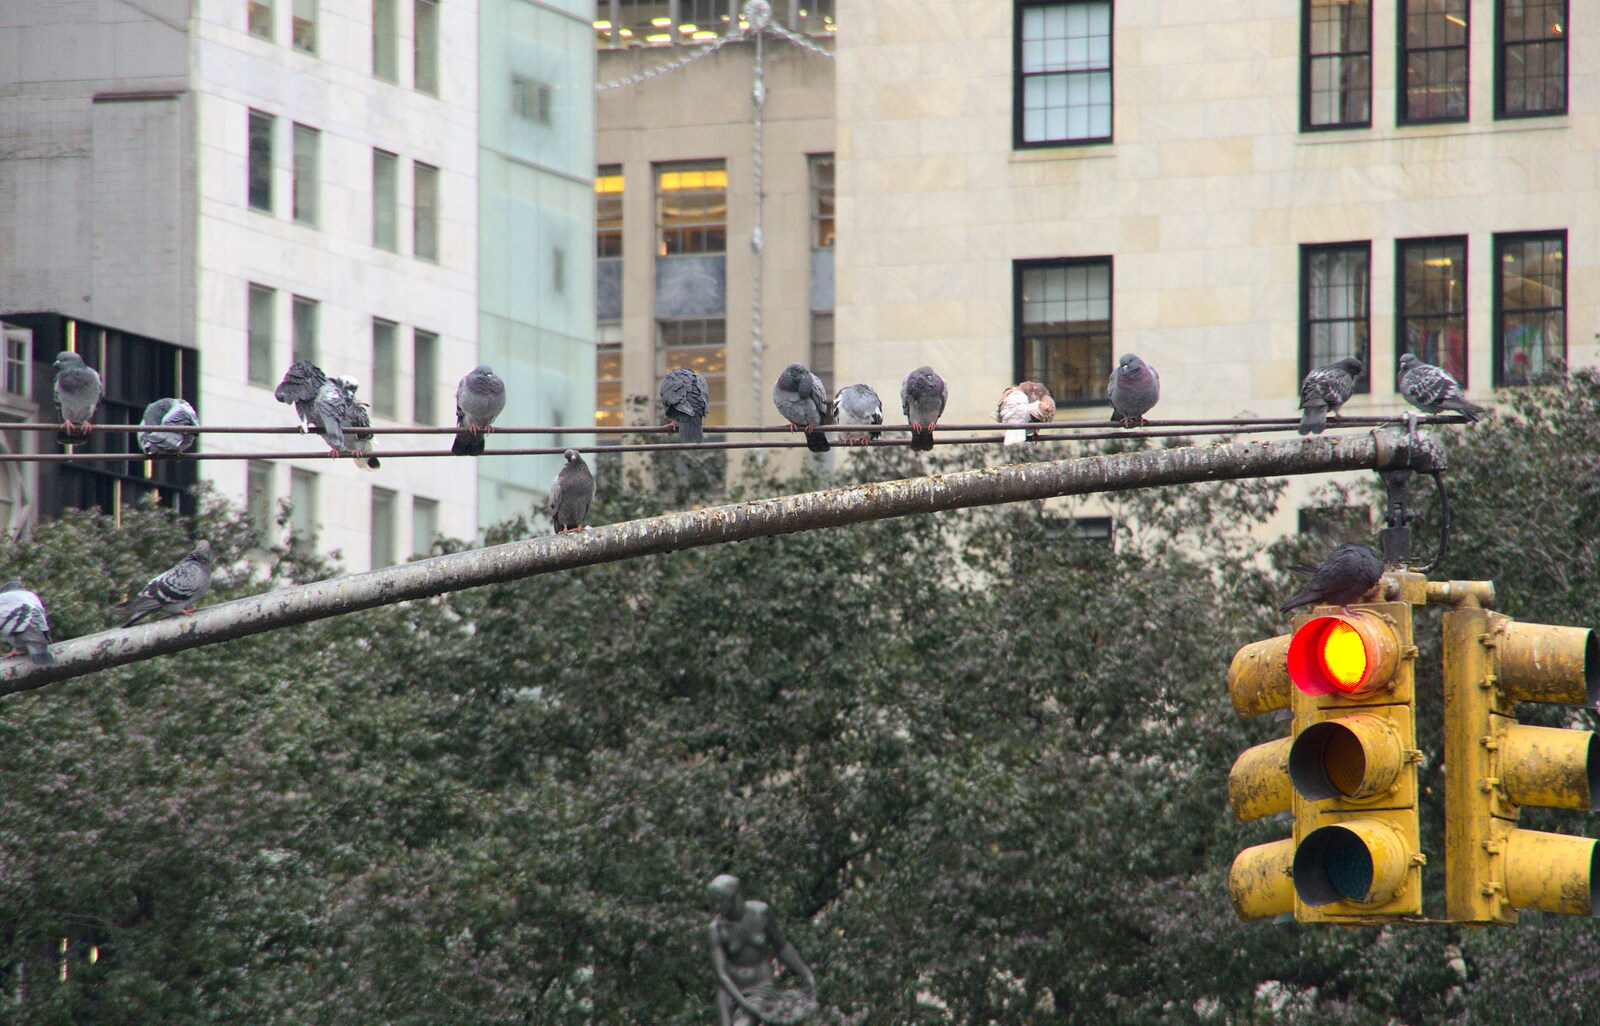 Pigeons on a traffic light from Open-top Buses and a Day at the Museum, New York, United States - 22nd October 2018